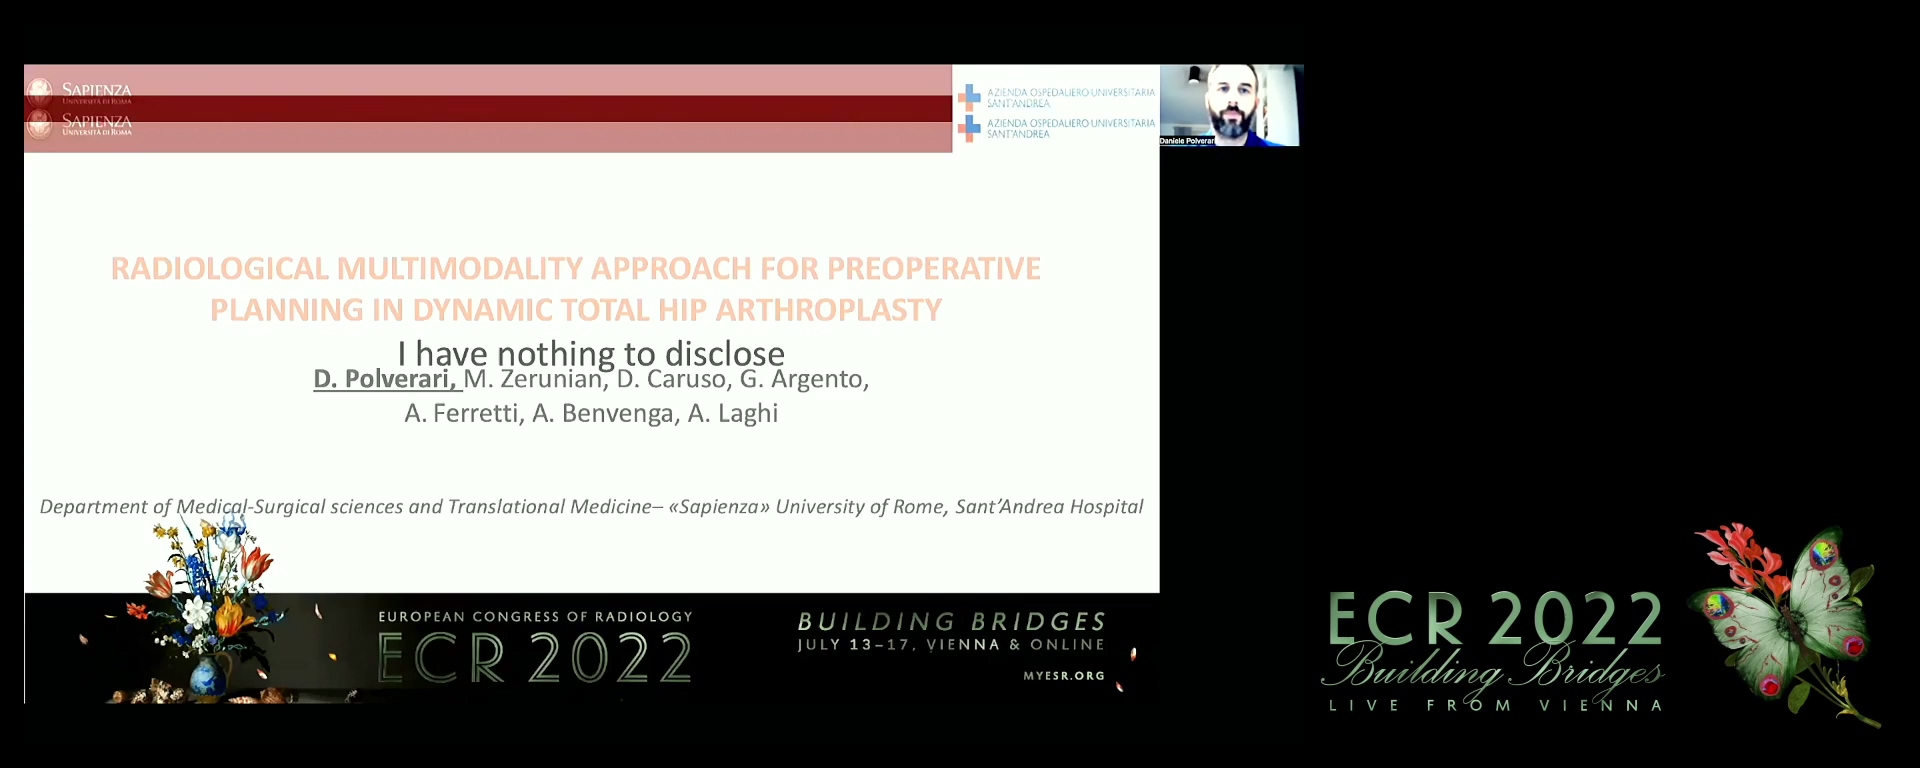 Radiological multimodality approach for preoperative planning in dynamic total hip arthroplasty - Daniele Polverari, Rome / IT